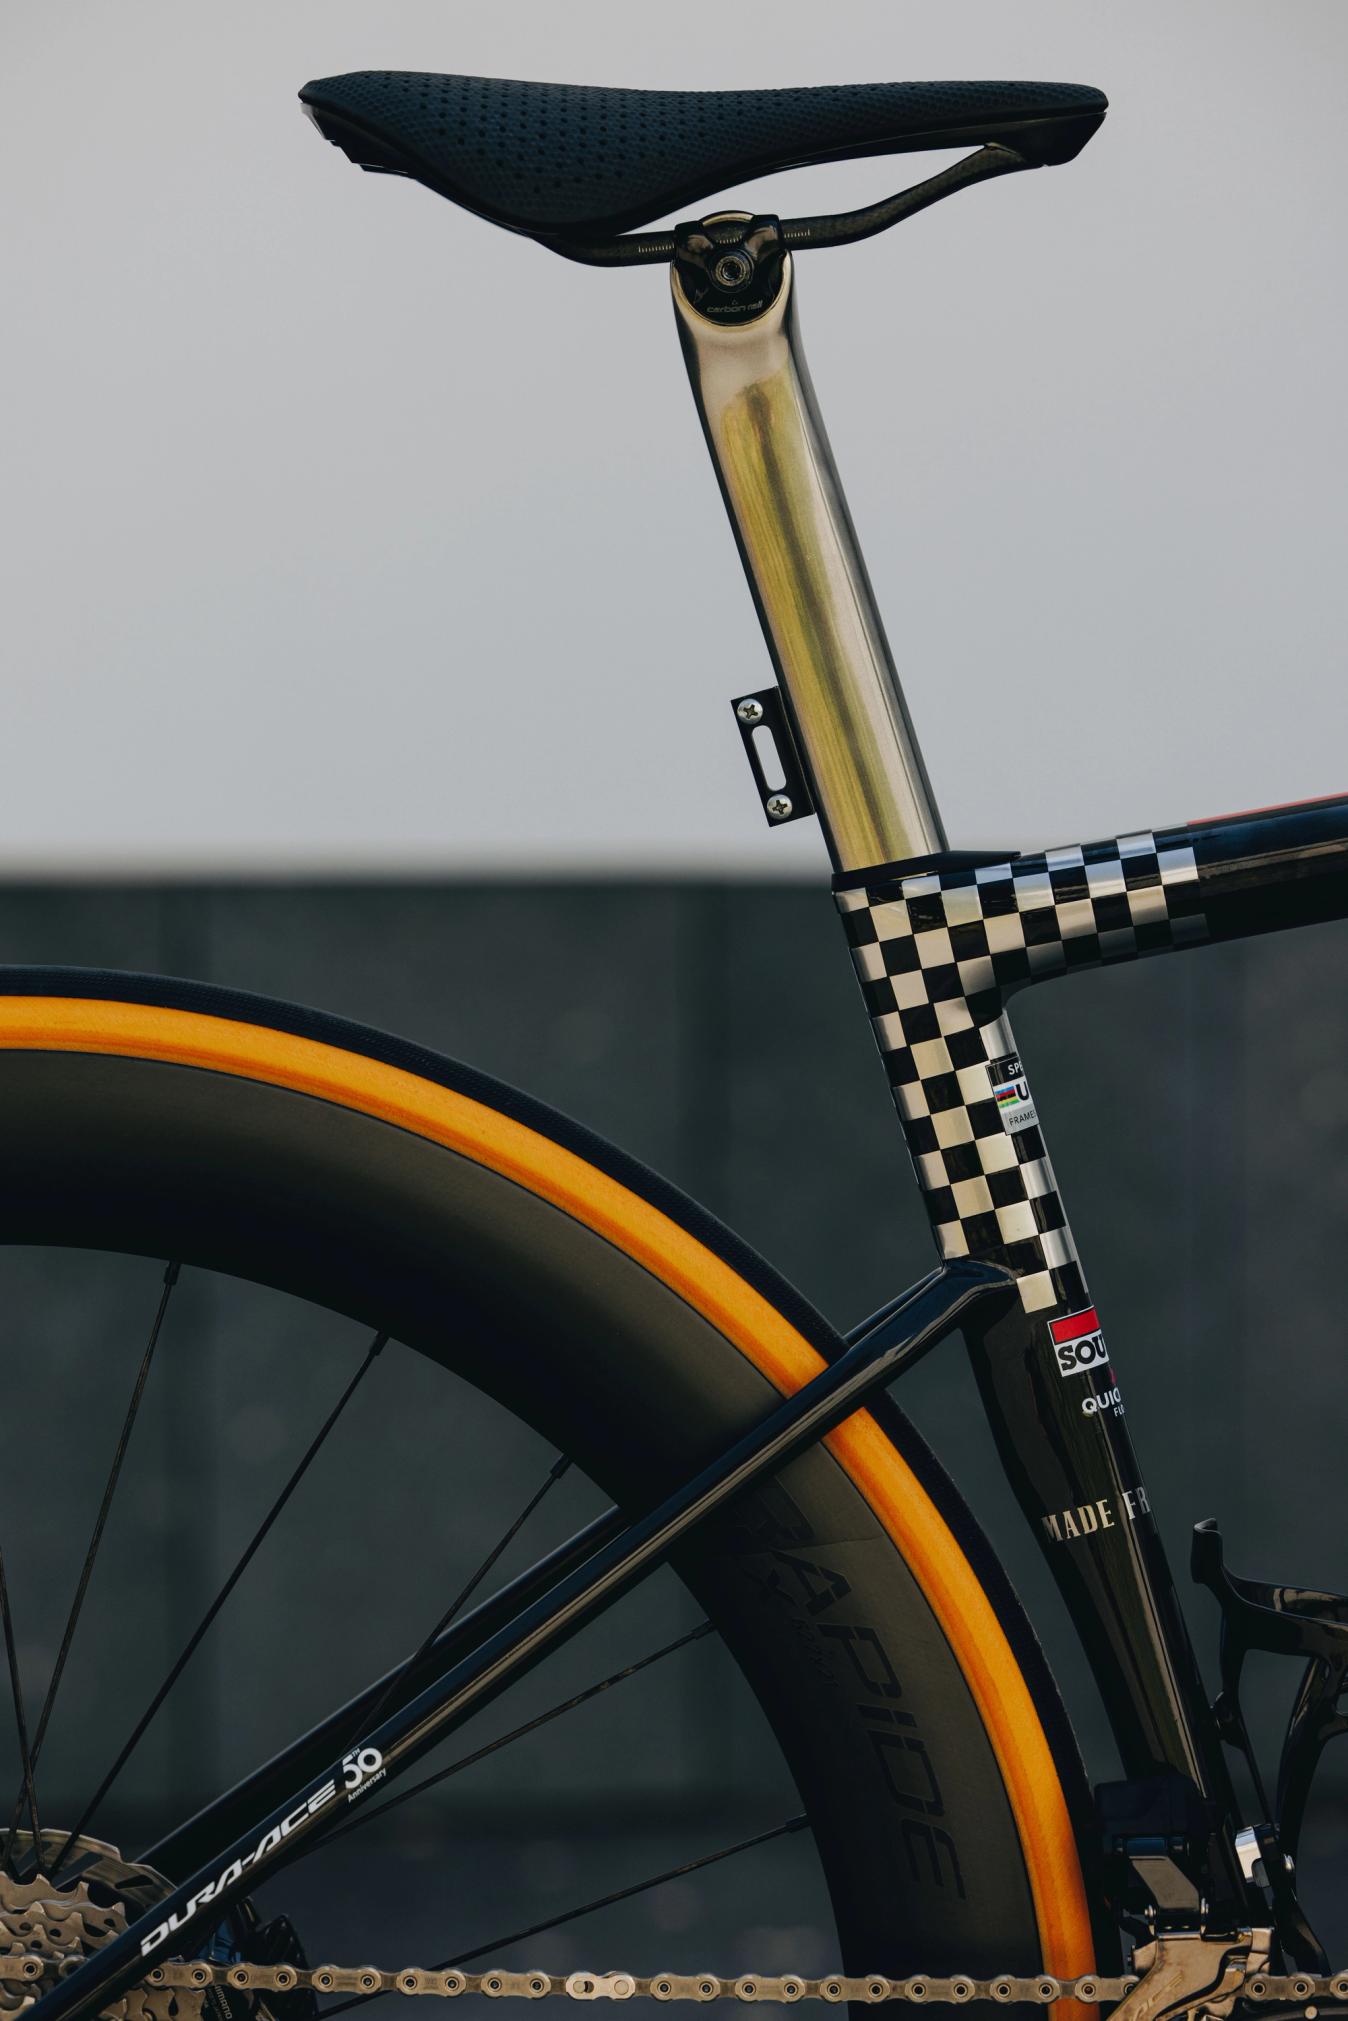 The paint scheme is to reflect Evenepoel's ability morph - like liquid metal - into a single aerodynamic blur of man and machine